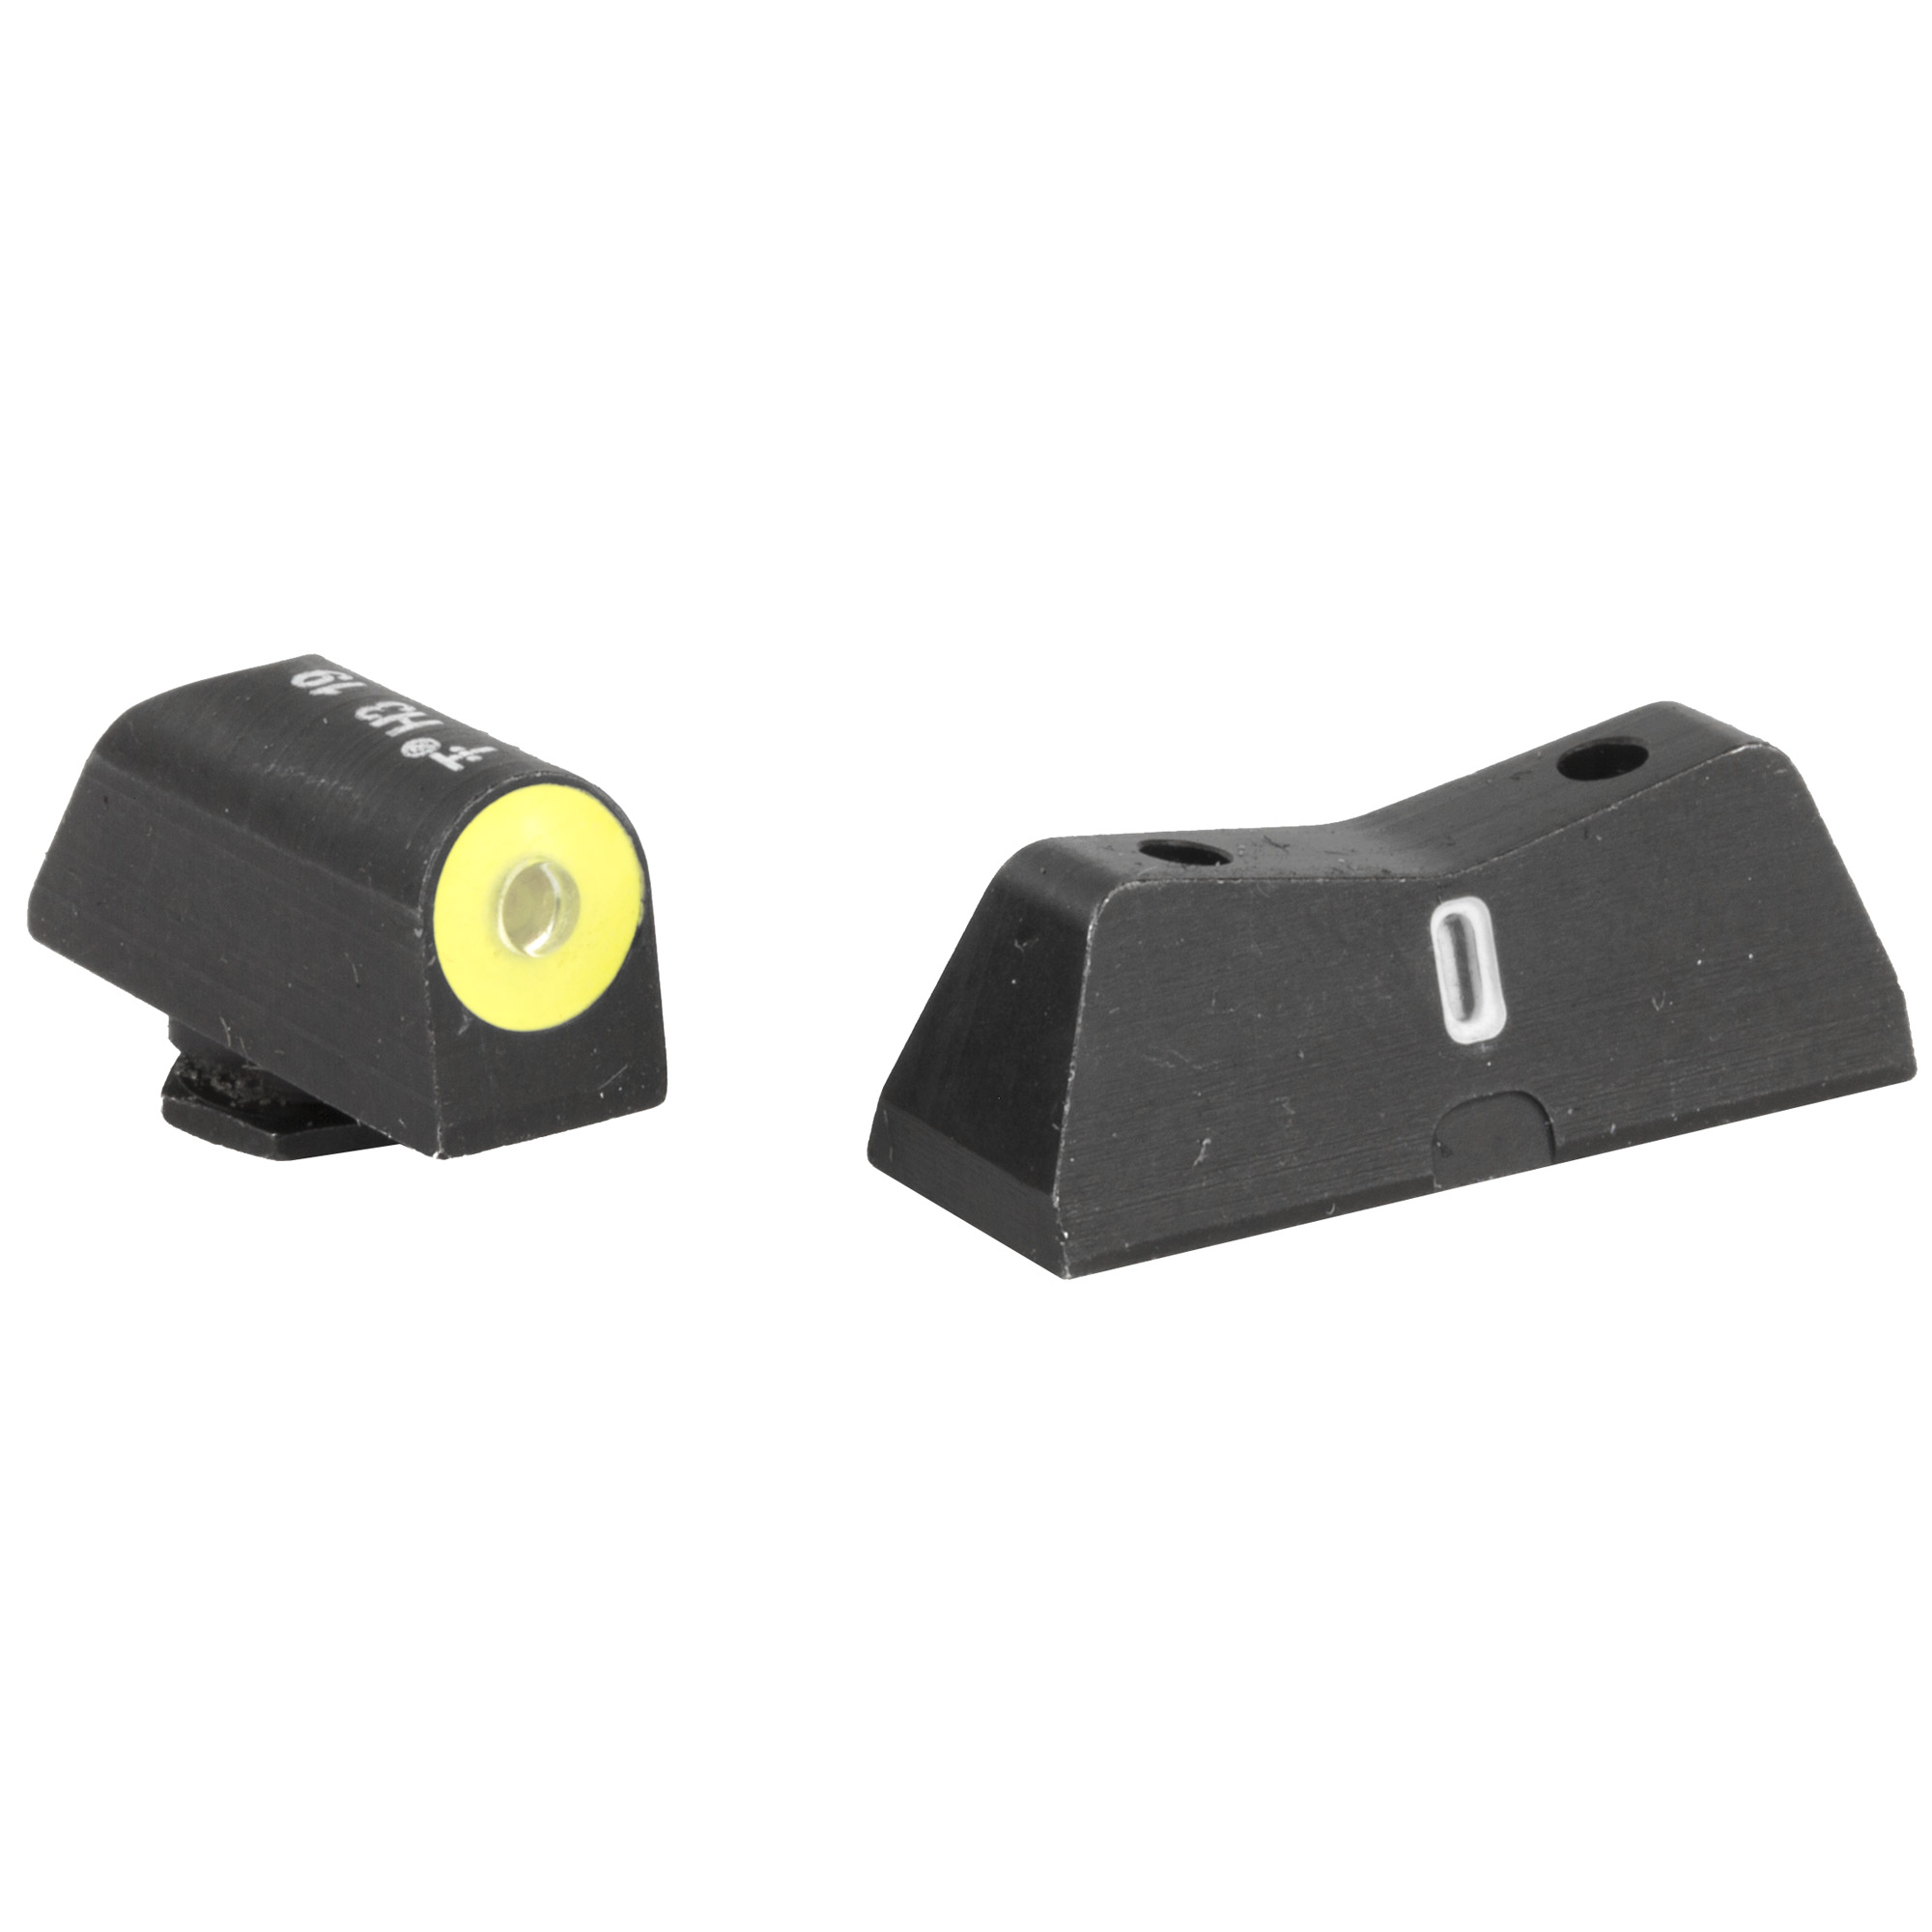 XS Sights, DXT2 Big Dot Tritium Front, White Stripe Express Rear, Fits Sig Sauer Models: P225, P226, P229, P320, Springfield XD, XDm, XDs, Green with Yellow Outline